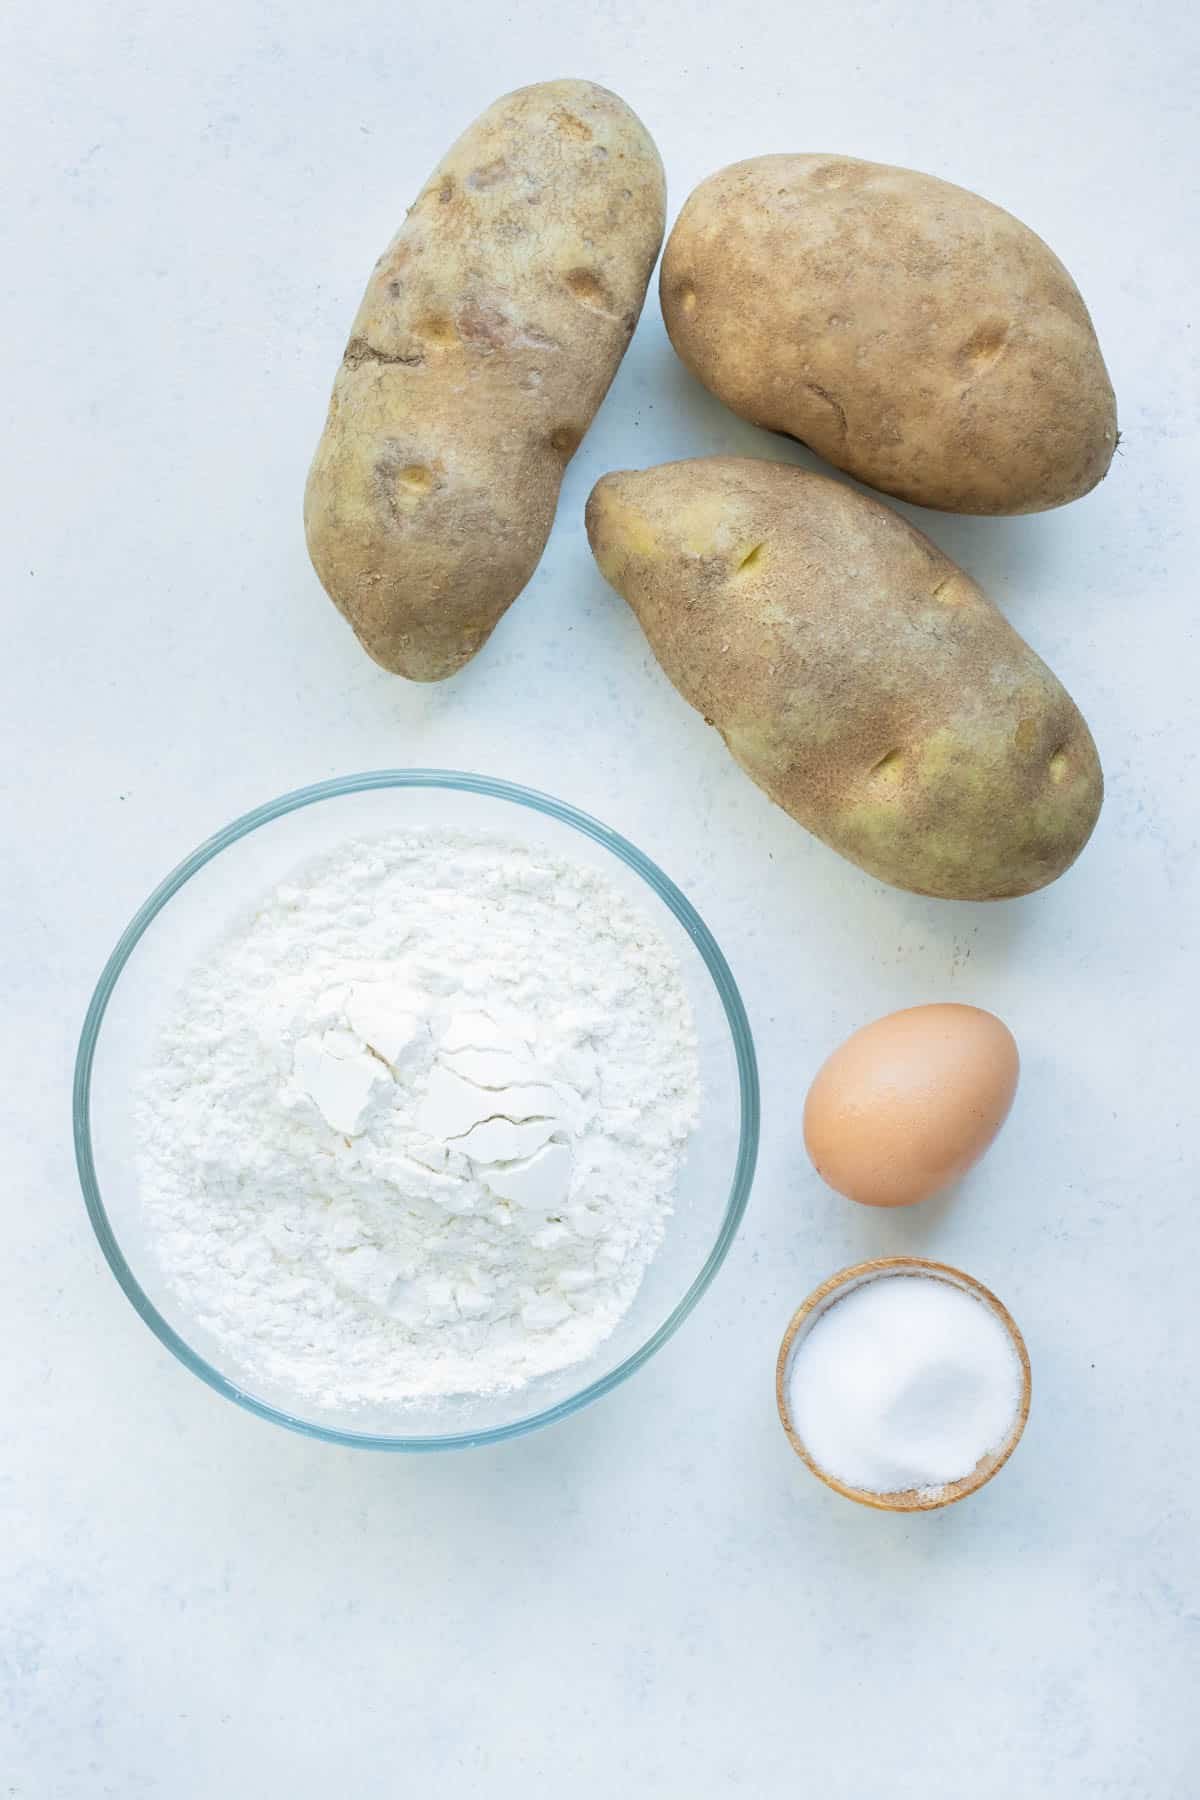 Potatoes, egg, and flour are the ingredients for gnocchi.